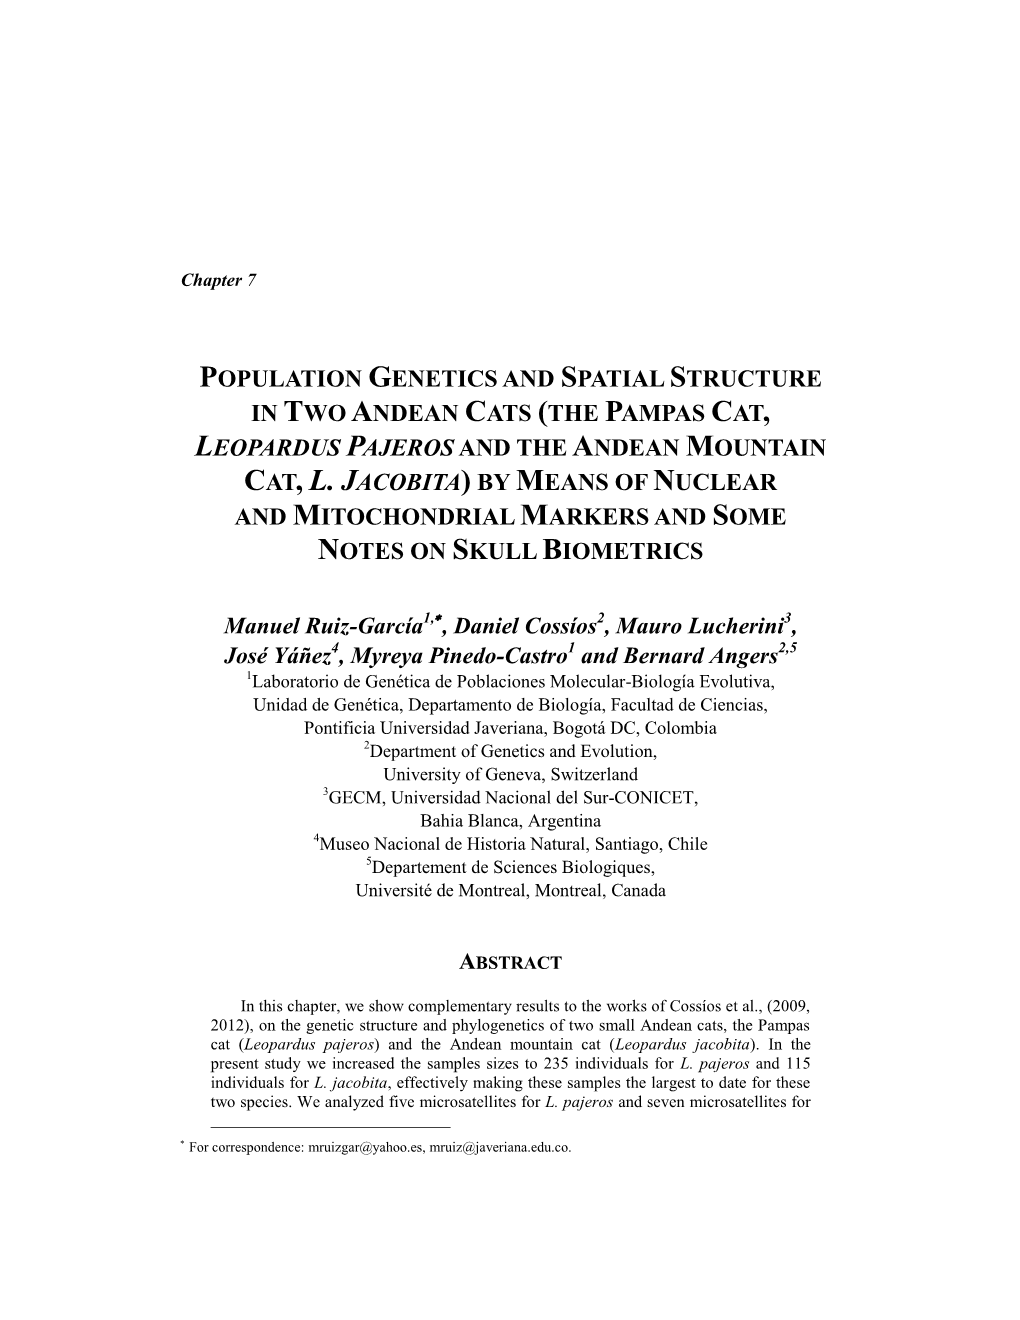 Population Genetics and Spatial Structure in Two Andean Cats (The Pampas Cat, Leopardus Pajeros and the Andean Mountain Cat, L